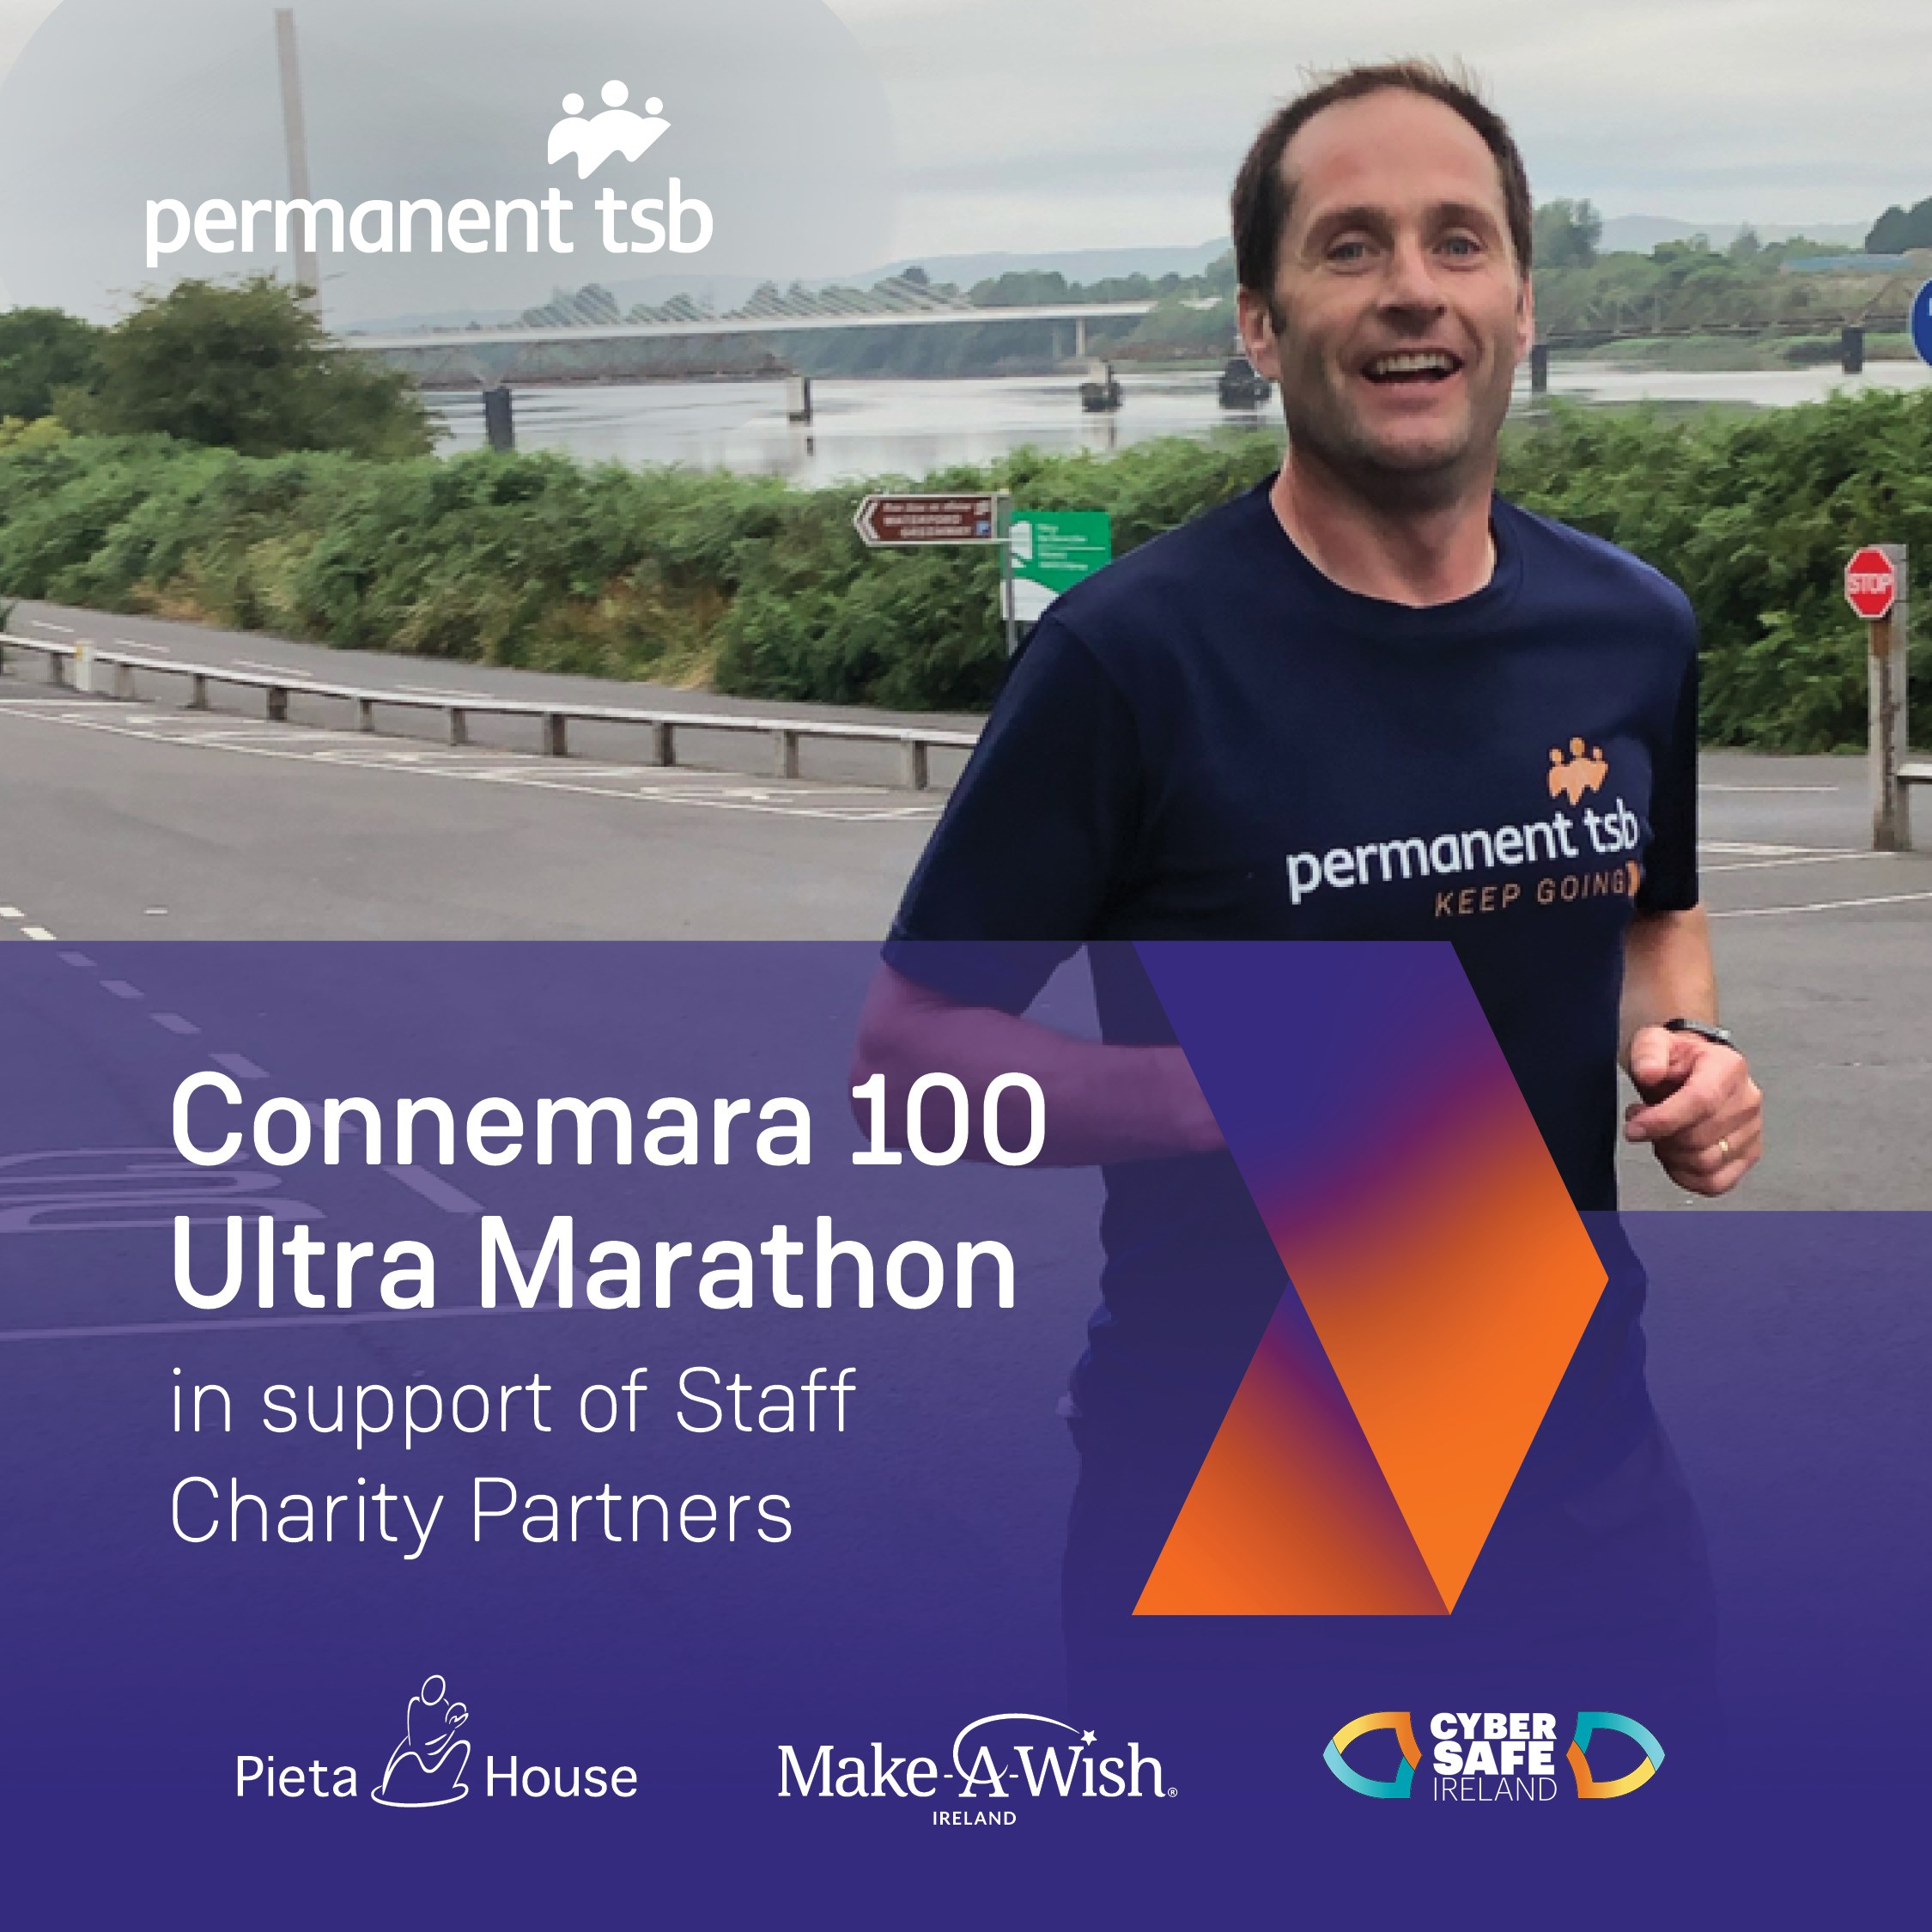 Banner showing Declan Fitzpatrick and text 'Connemara 100 Ultra Marathon, in support of Staff Charity Partners' , Charity logos 